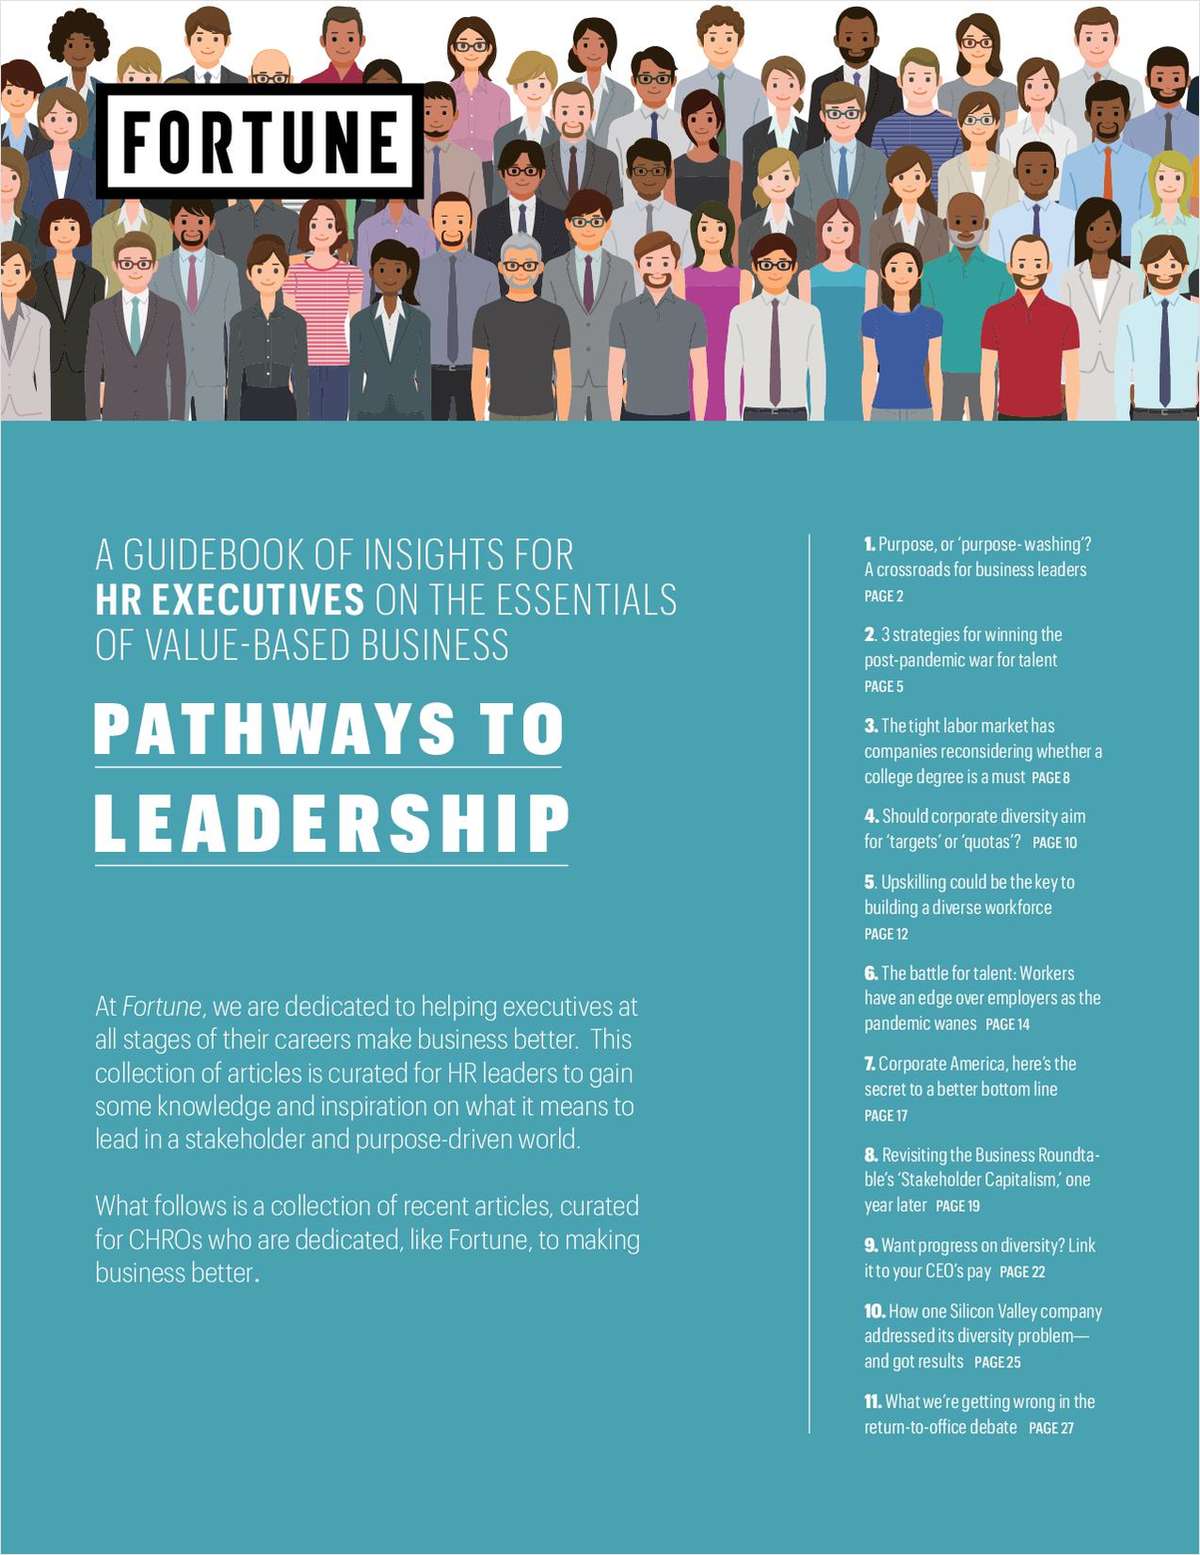 A Guidebook of Insights for HR Executives on the Essentials of Value-Based Business: Pathways to Leadership